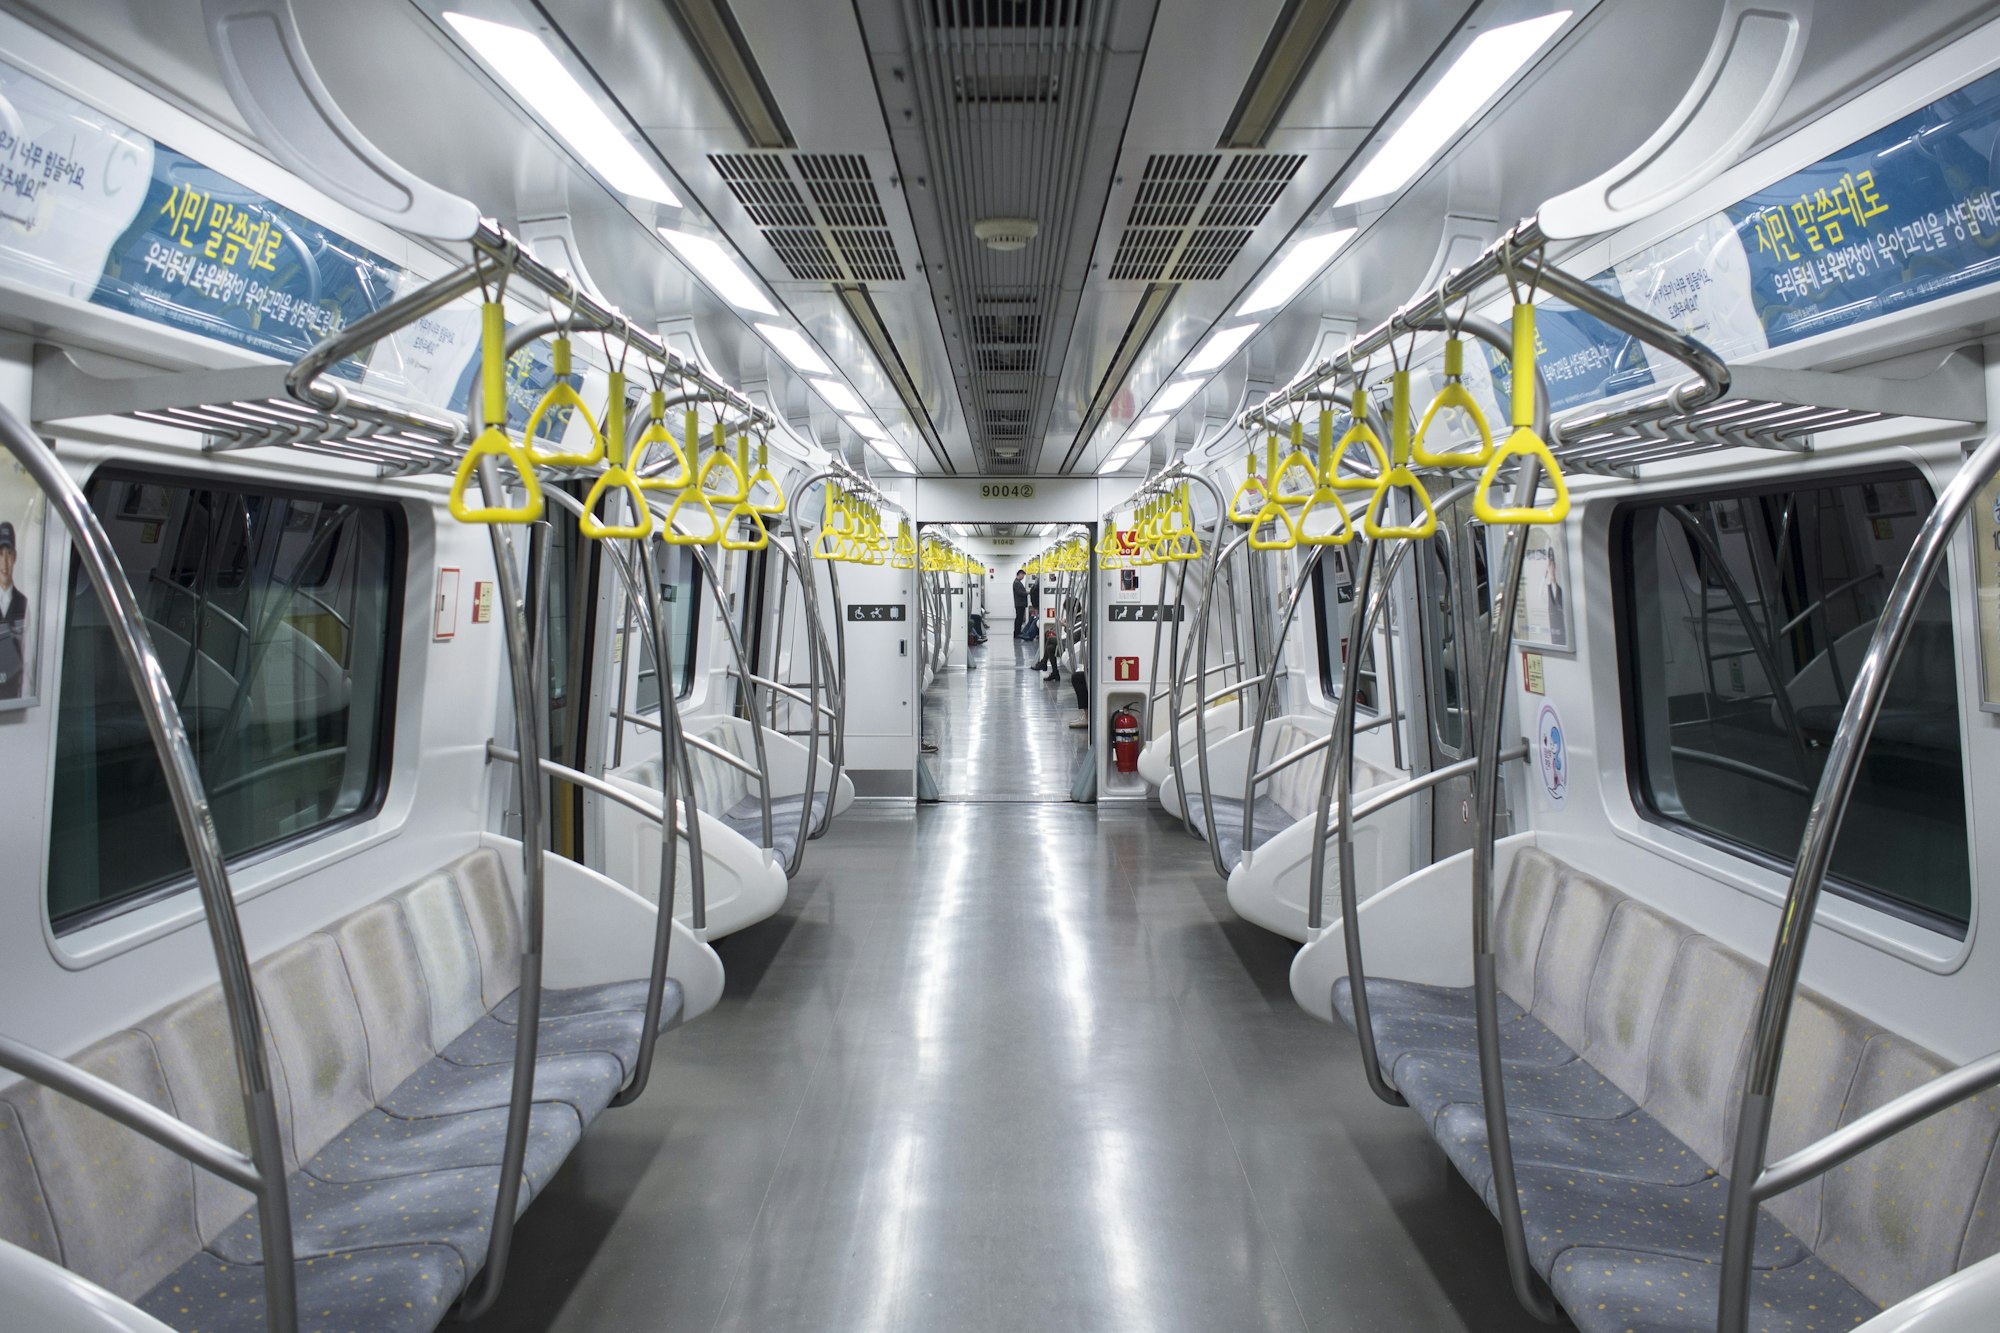 An almost empty train in the afternoon in Seoul, Korea. I was drawn by the contrast between the vibrant yellow handles and the bright, clean train.